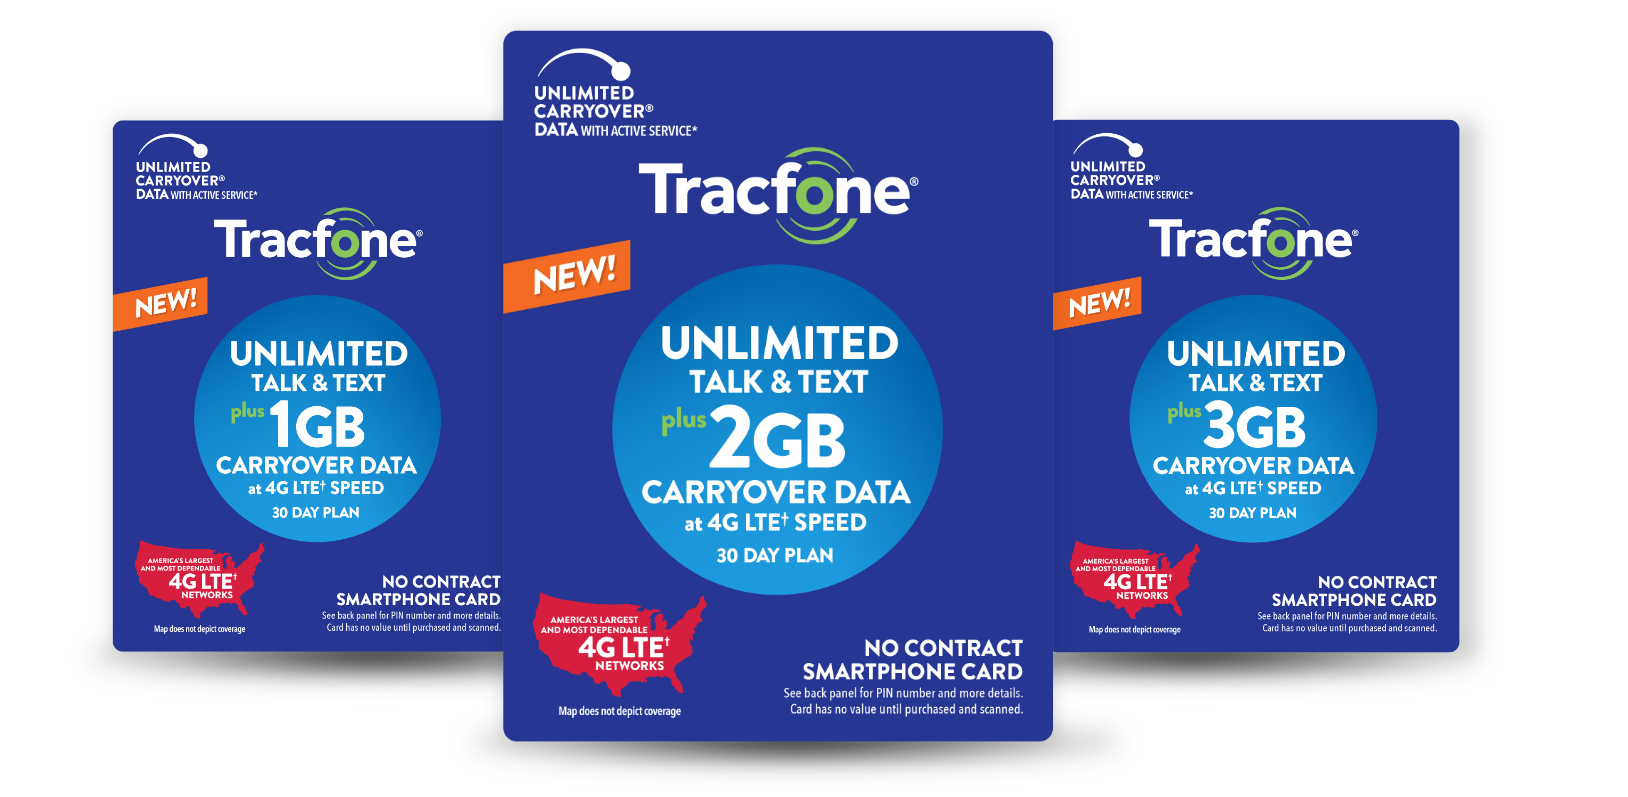 Can You Get Unlimited Data On Tracfone